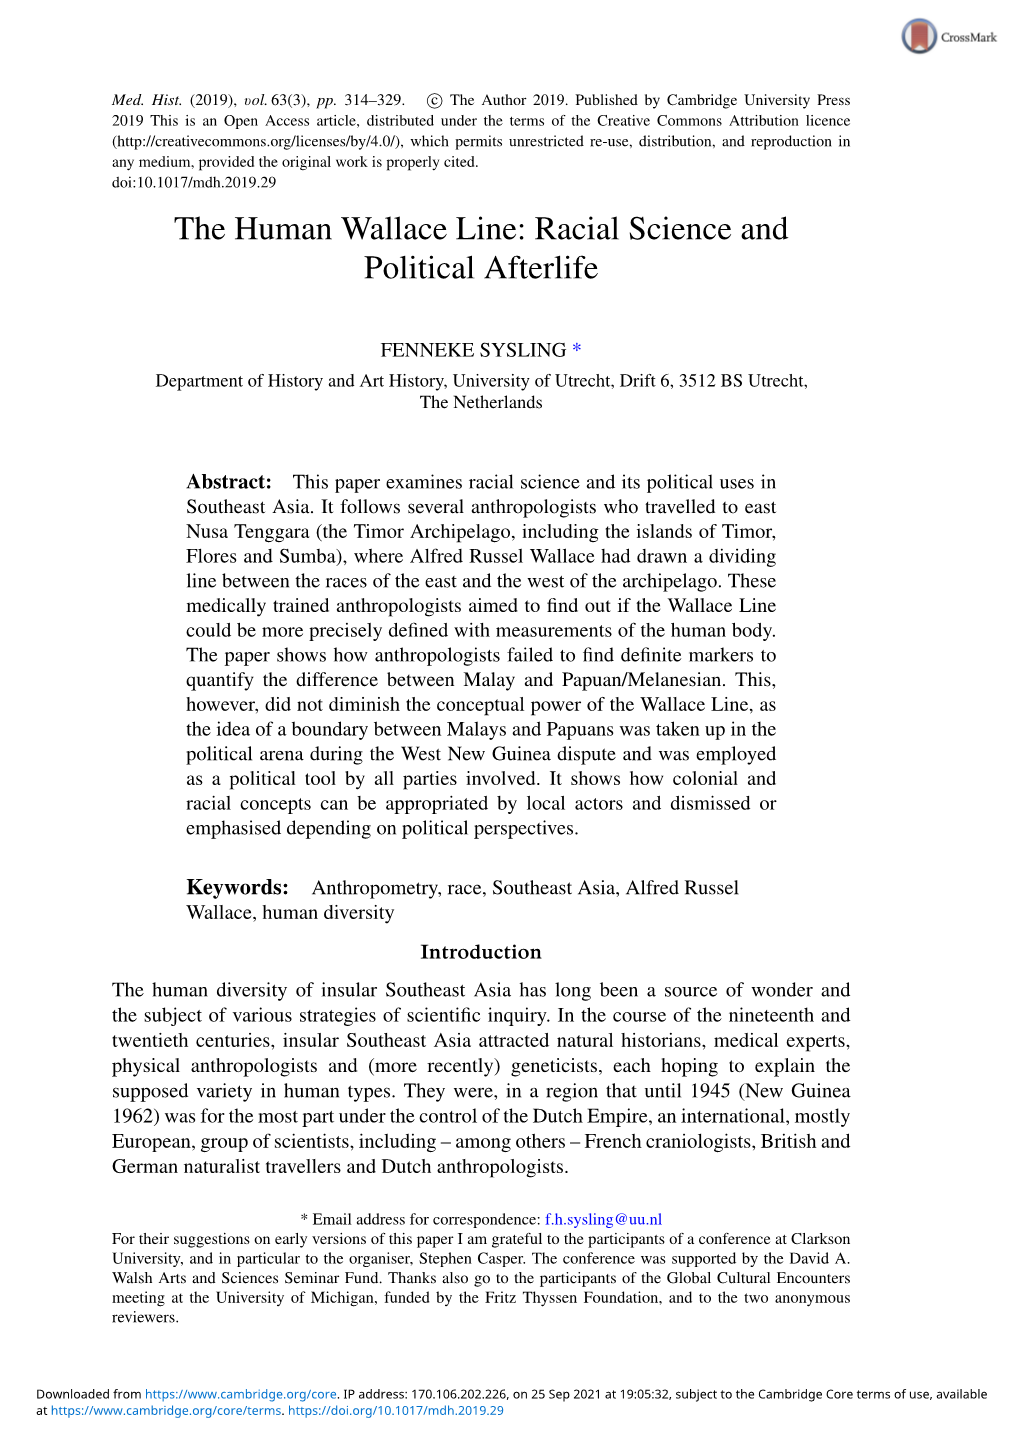 The Human Wallace Line: Racial Science and Political Afterlife